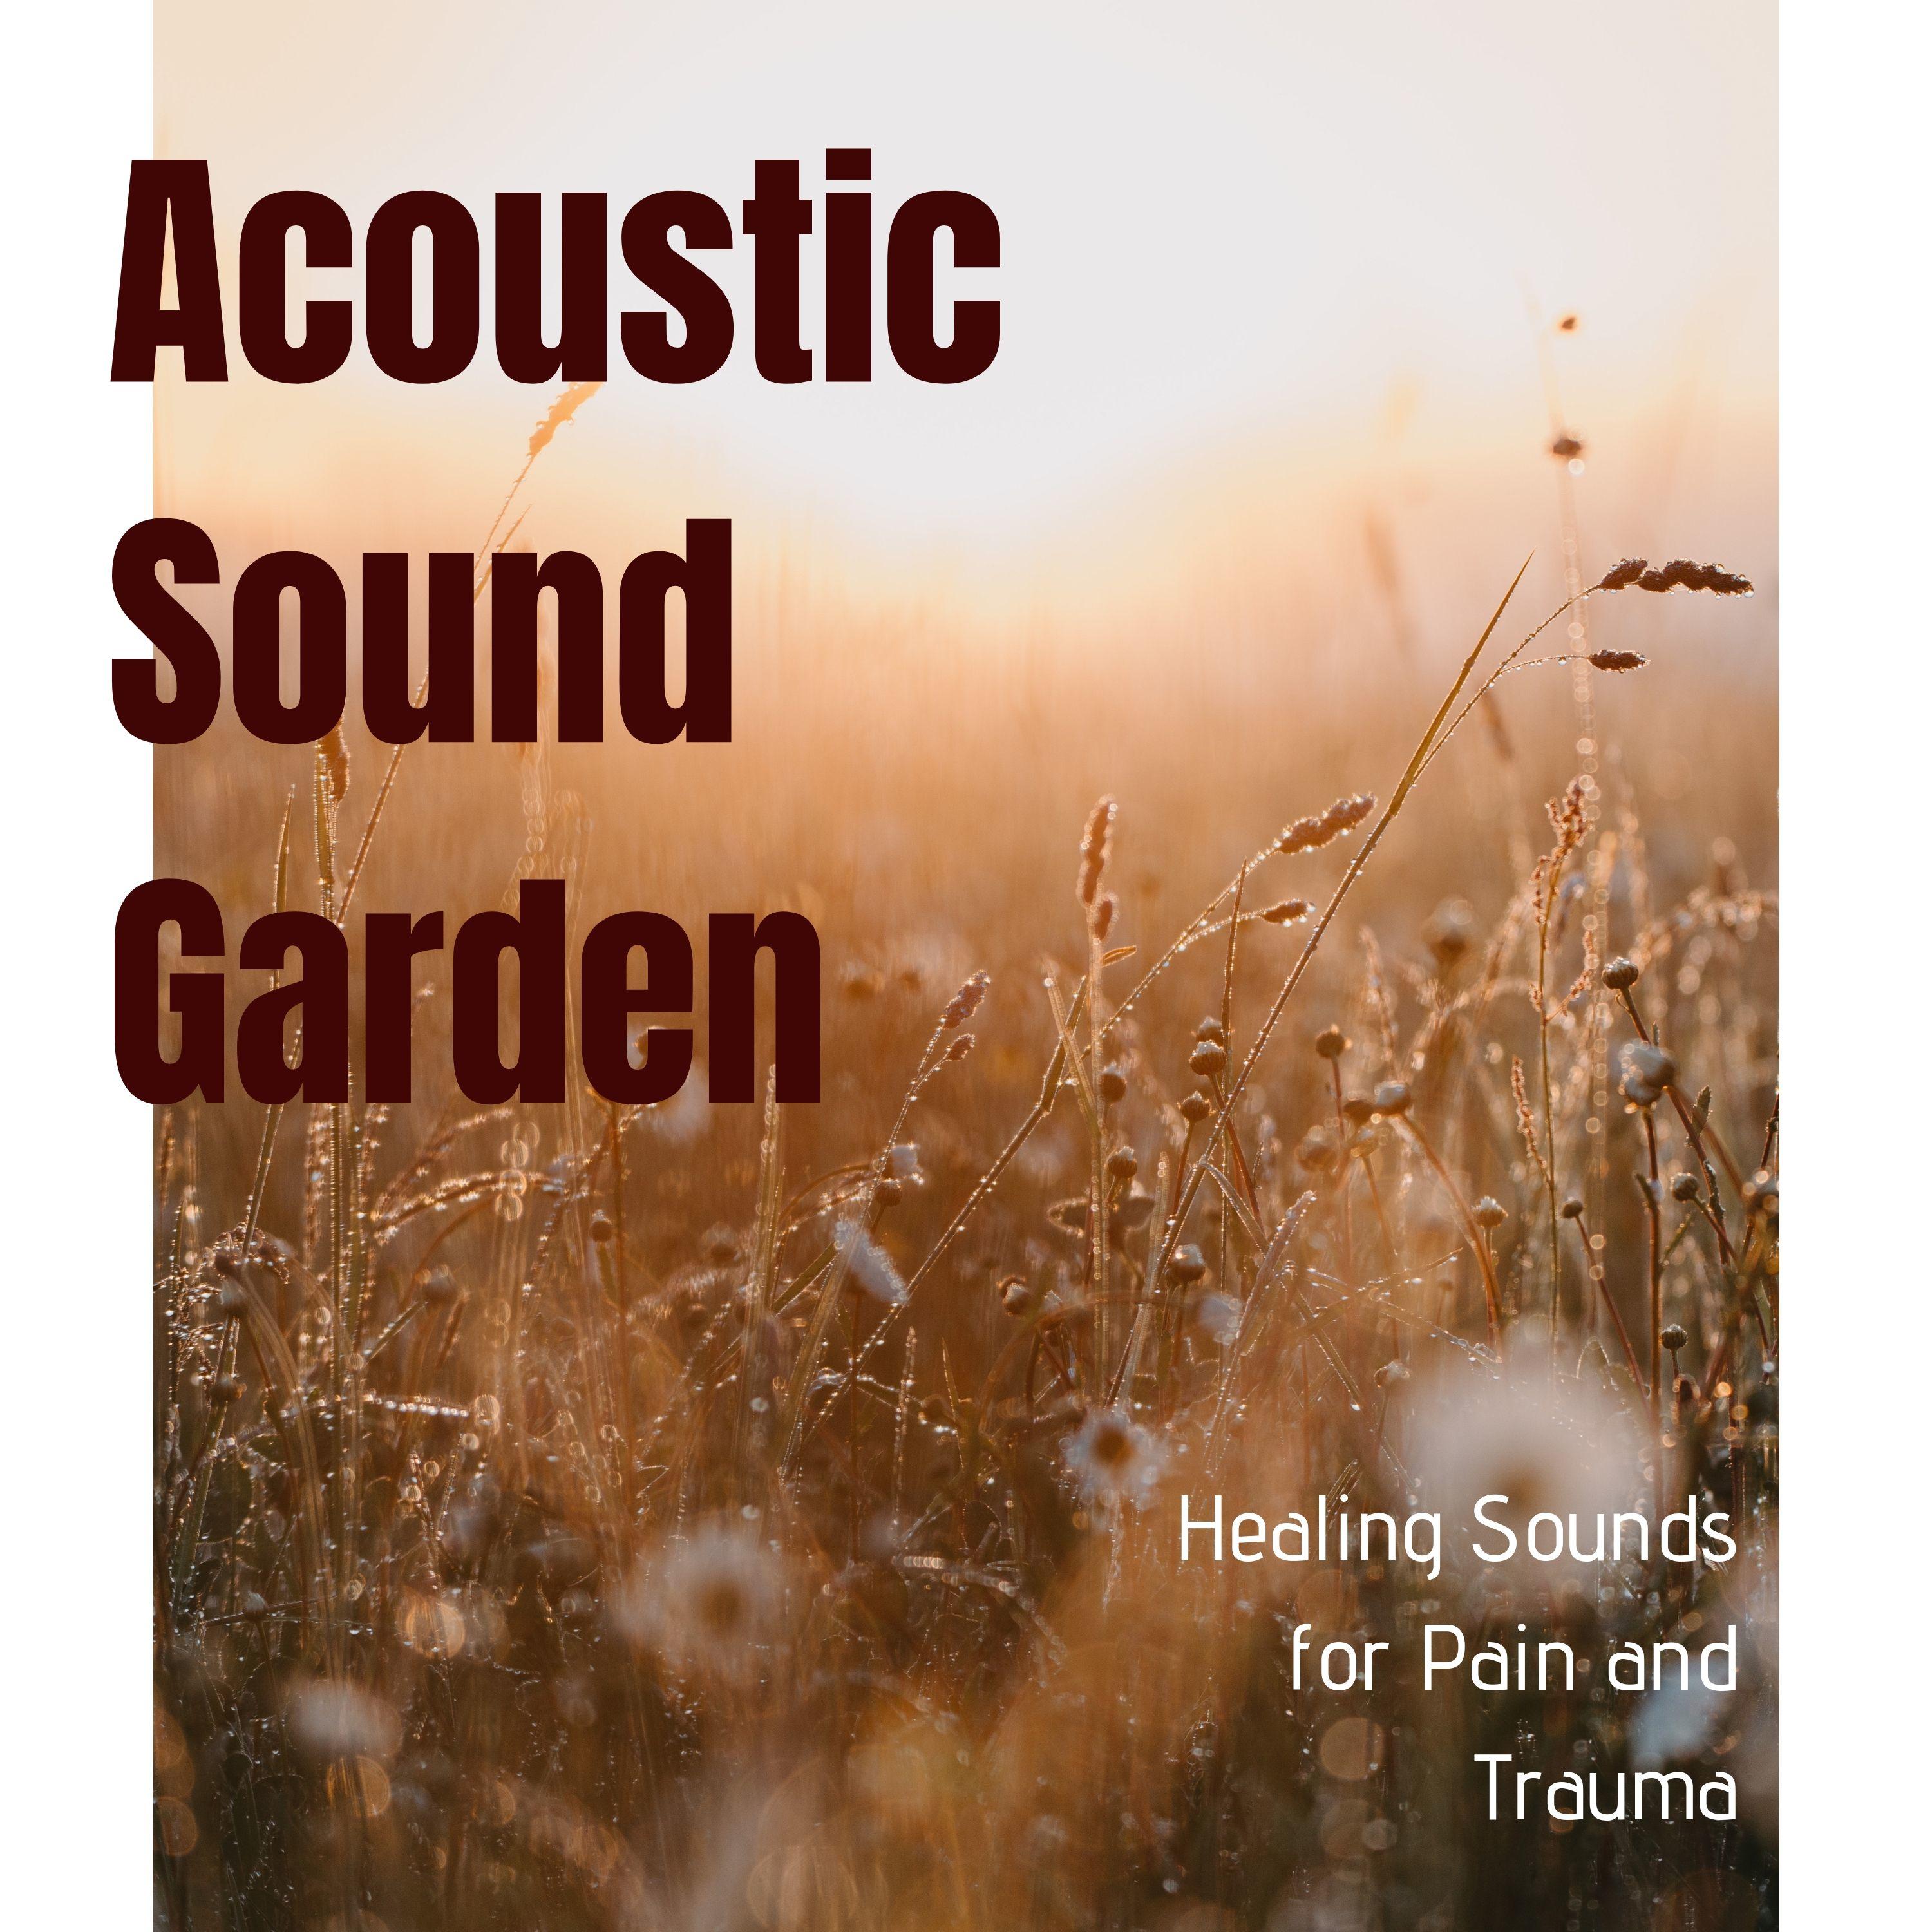 Acoustic Sound Garden - Healing Sounds for Pain and Trauma